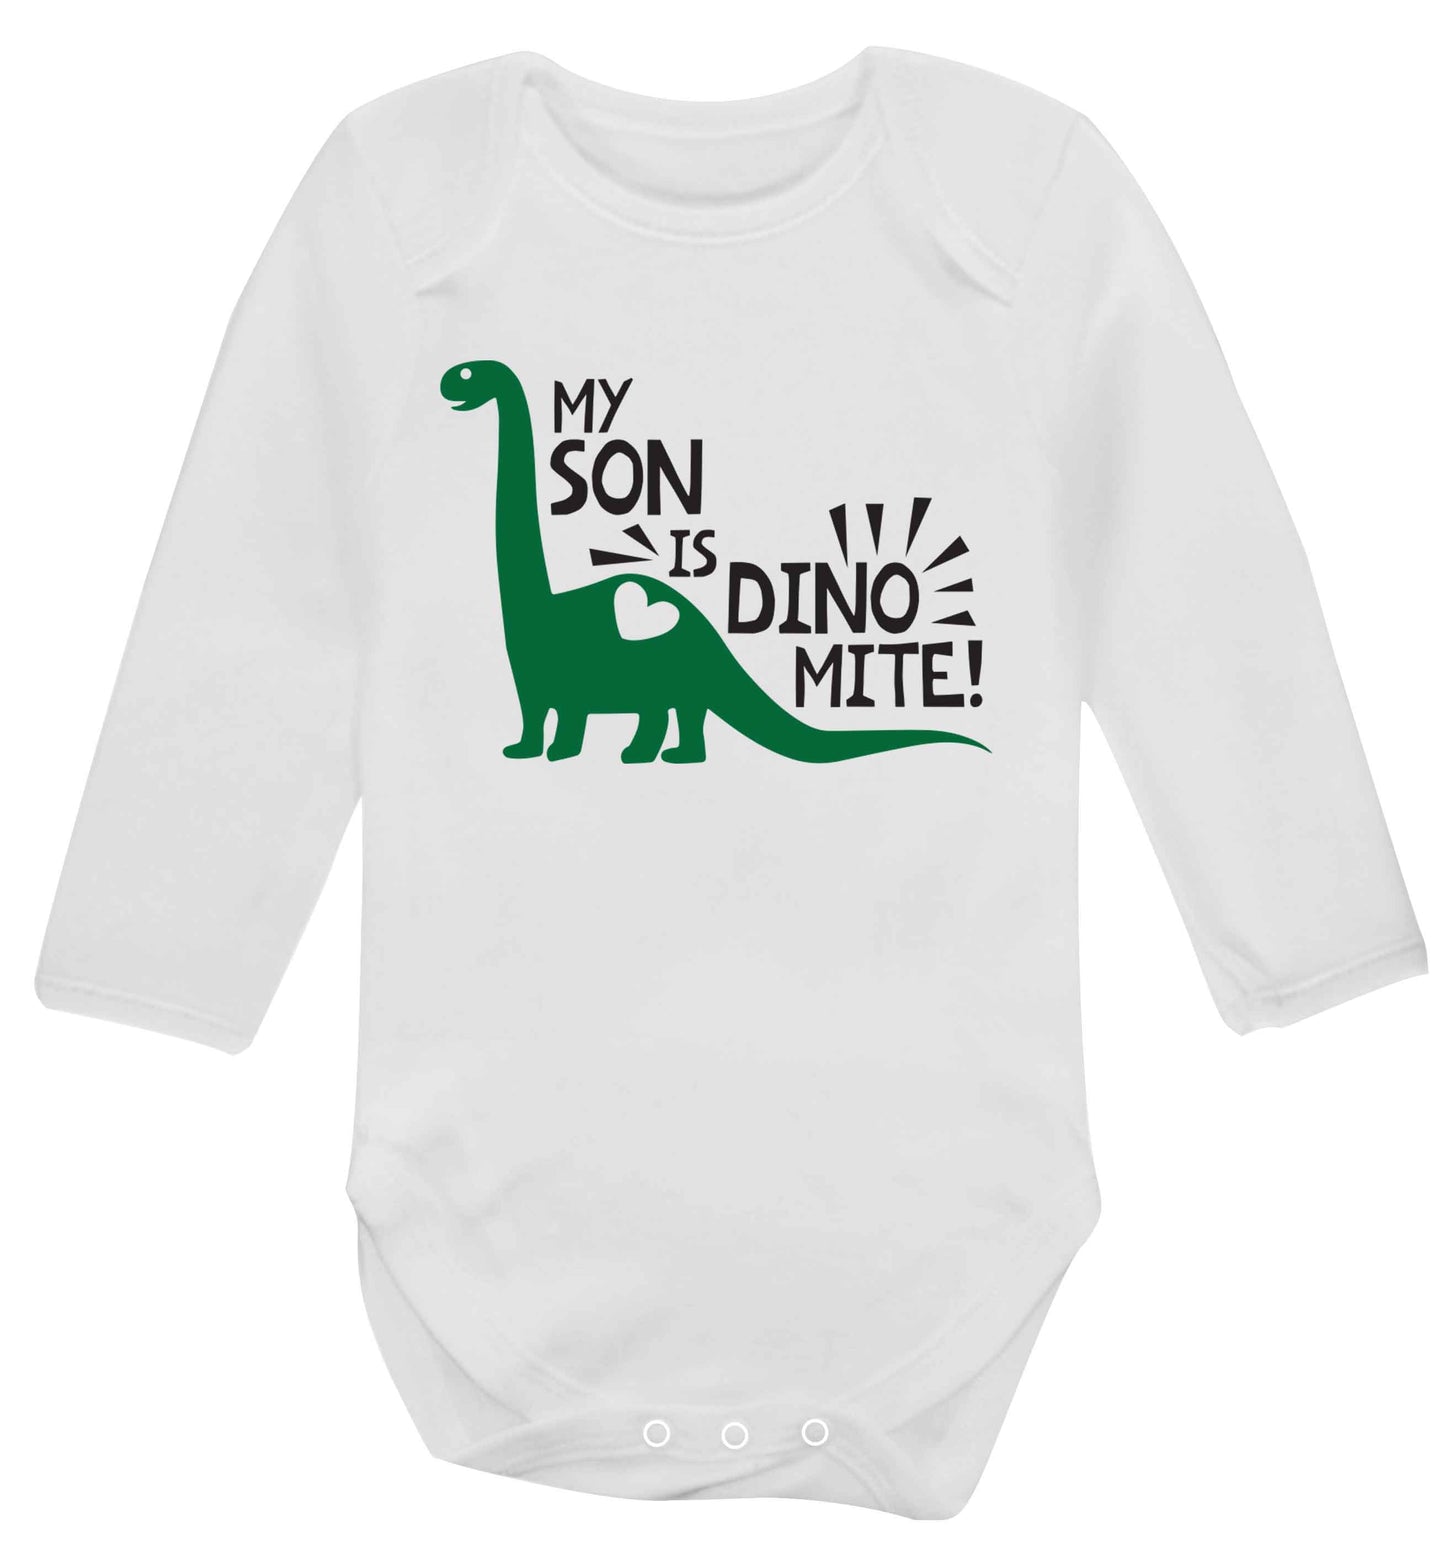 My son is dinomite! Baby Vest long sleeved white 6-12 months